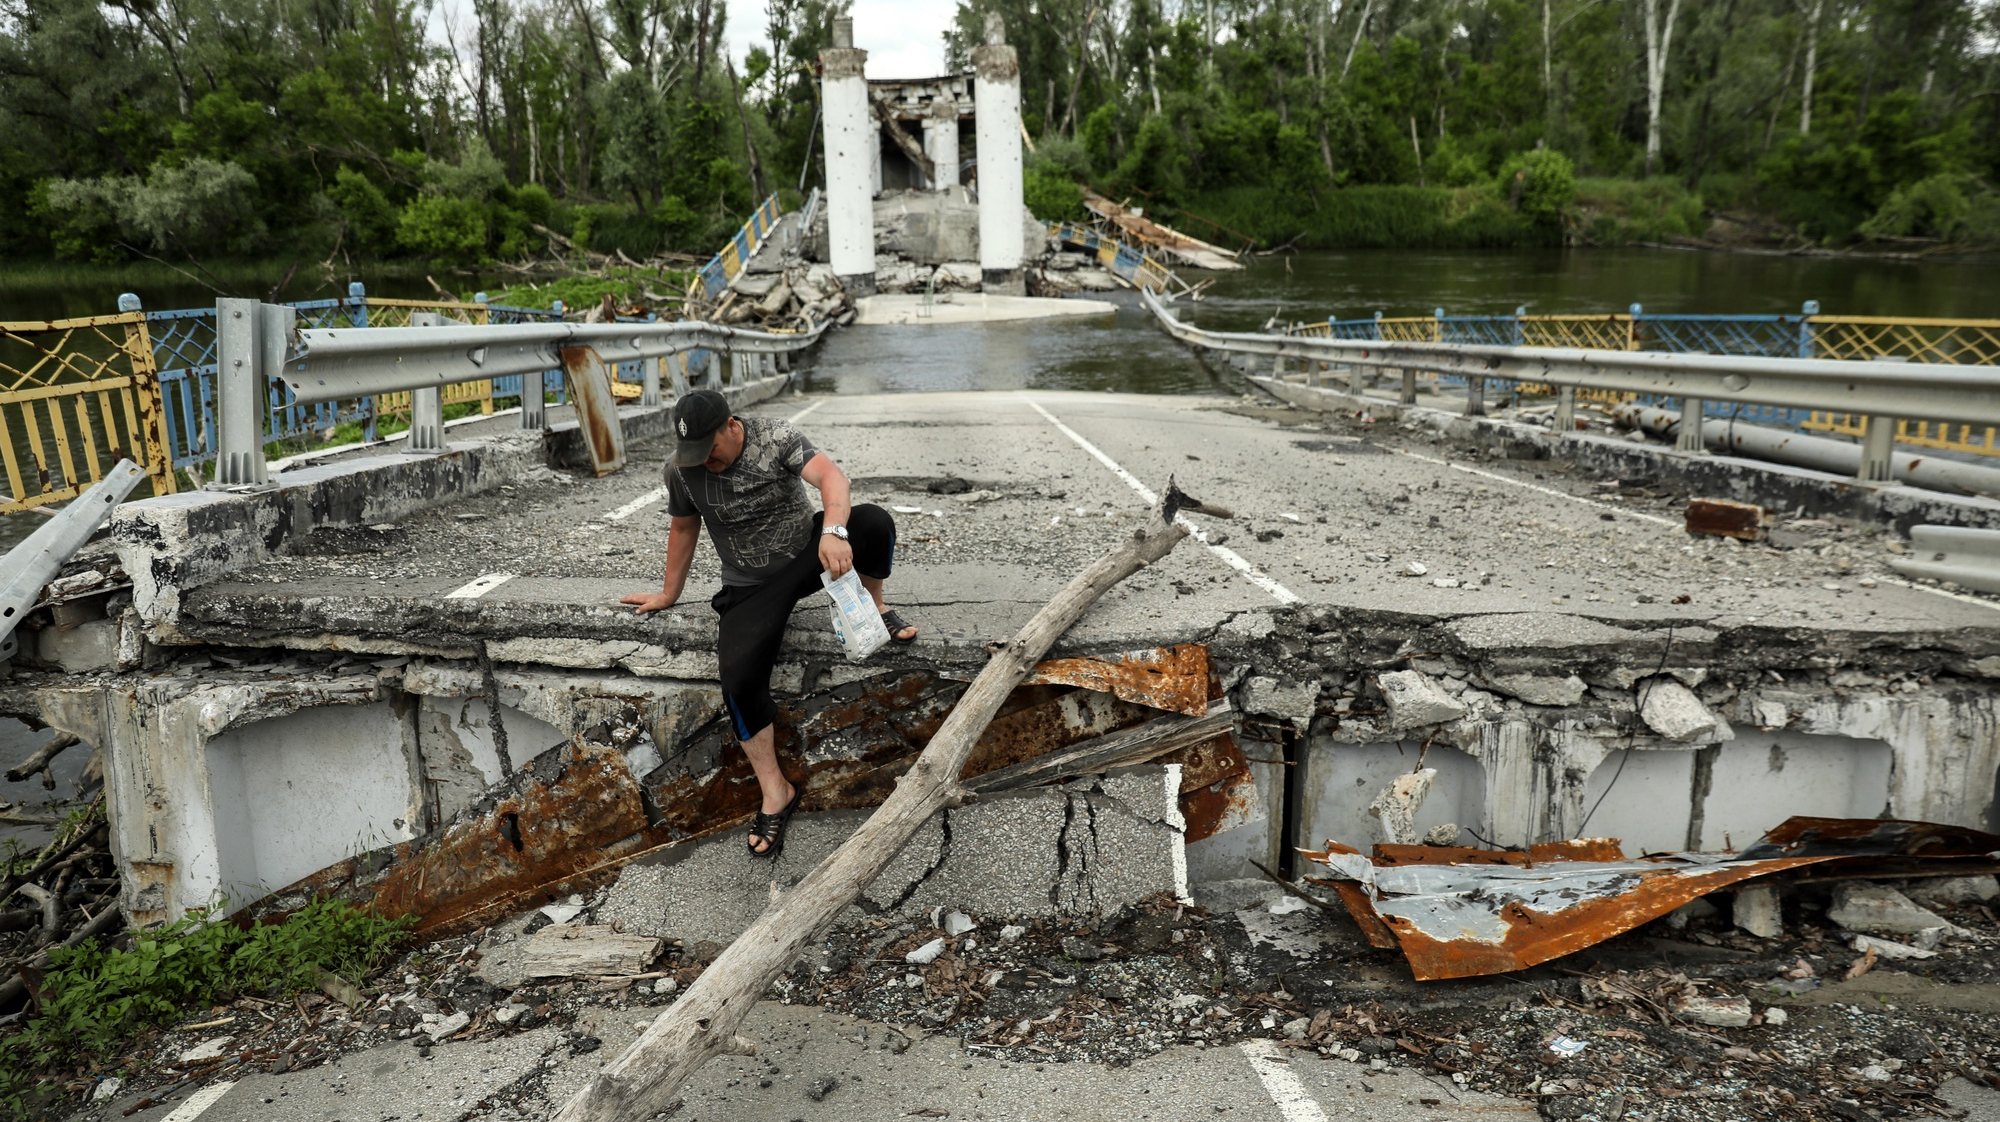 epa10664401 A local resident crosses the Siversky Donets River on a destroyed bridge in Bohorodychne village, Donetsk region, Ukraine, 30 May 2023 (issued 31 May 2023). Before the war, the population of Bohorodyche was around 600 people. Today, only 18 people returned to their homes. Russian troops entered Ukraine on 24 February 2022 starting a conflict that has provoked destruction and a humanitarian crisis.  EPA/OLEG PETRASYUK